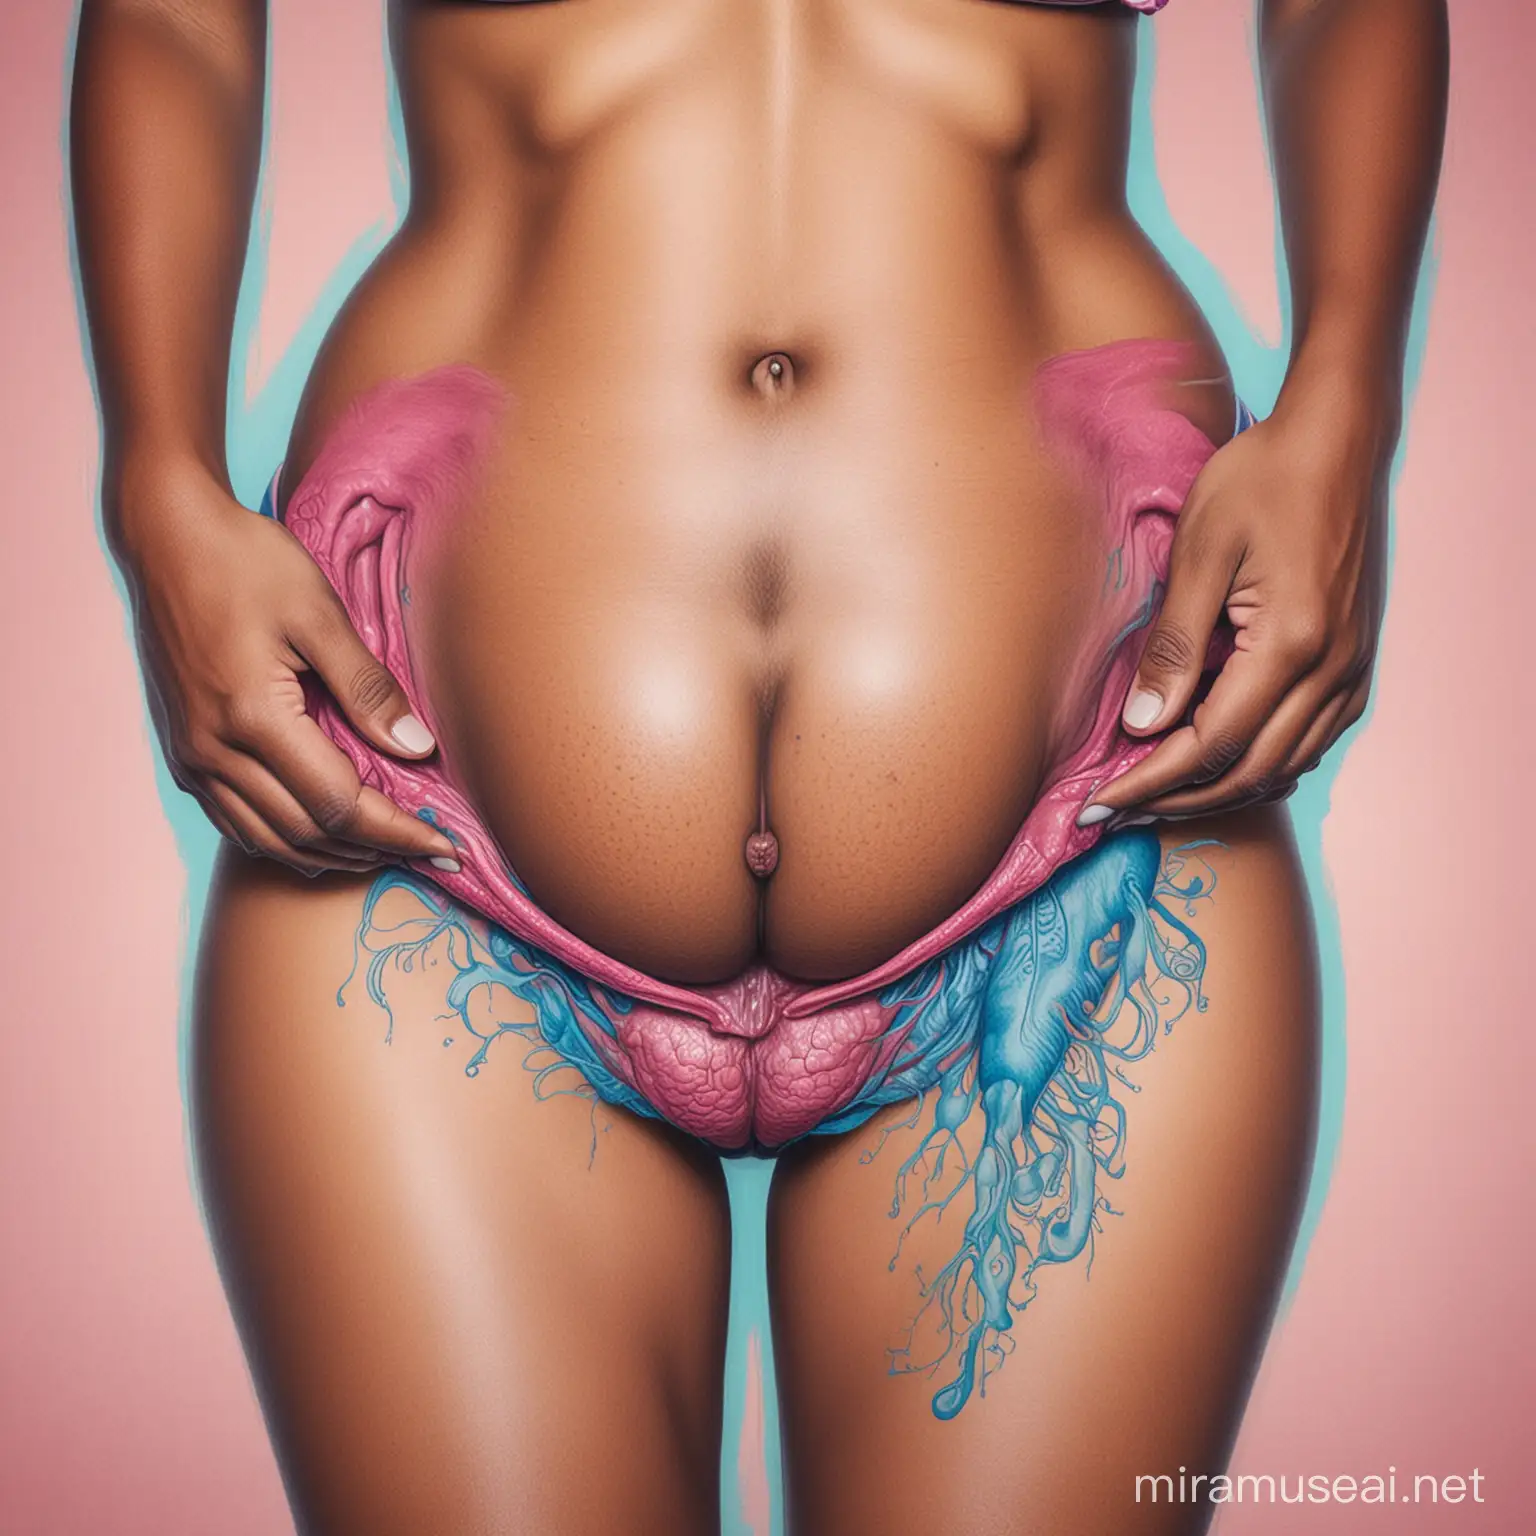 Vibrant Representation of Maternal Essence Blossoming Uterus in the Womb